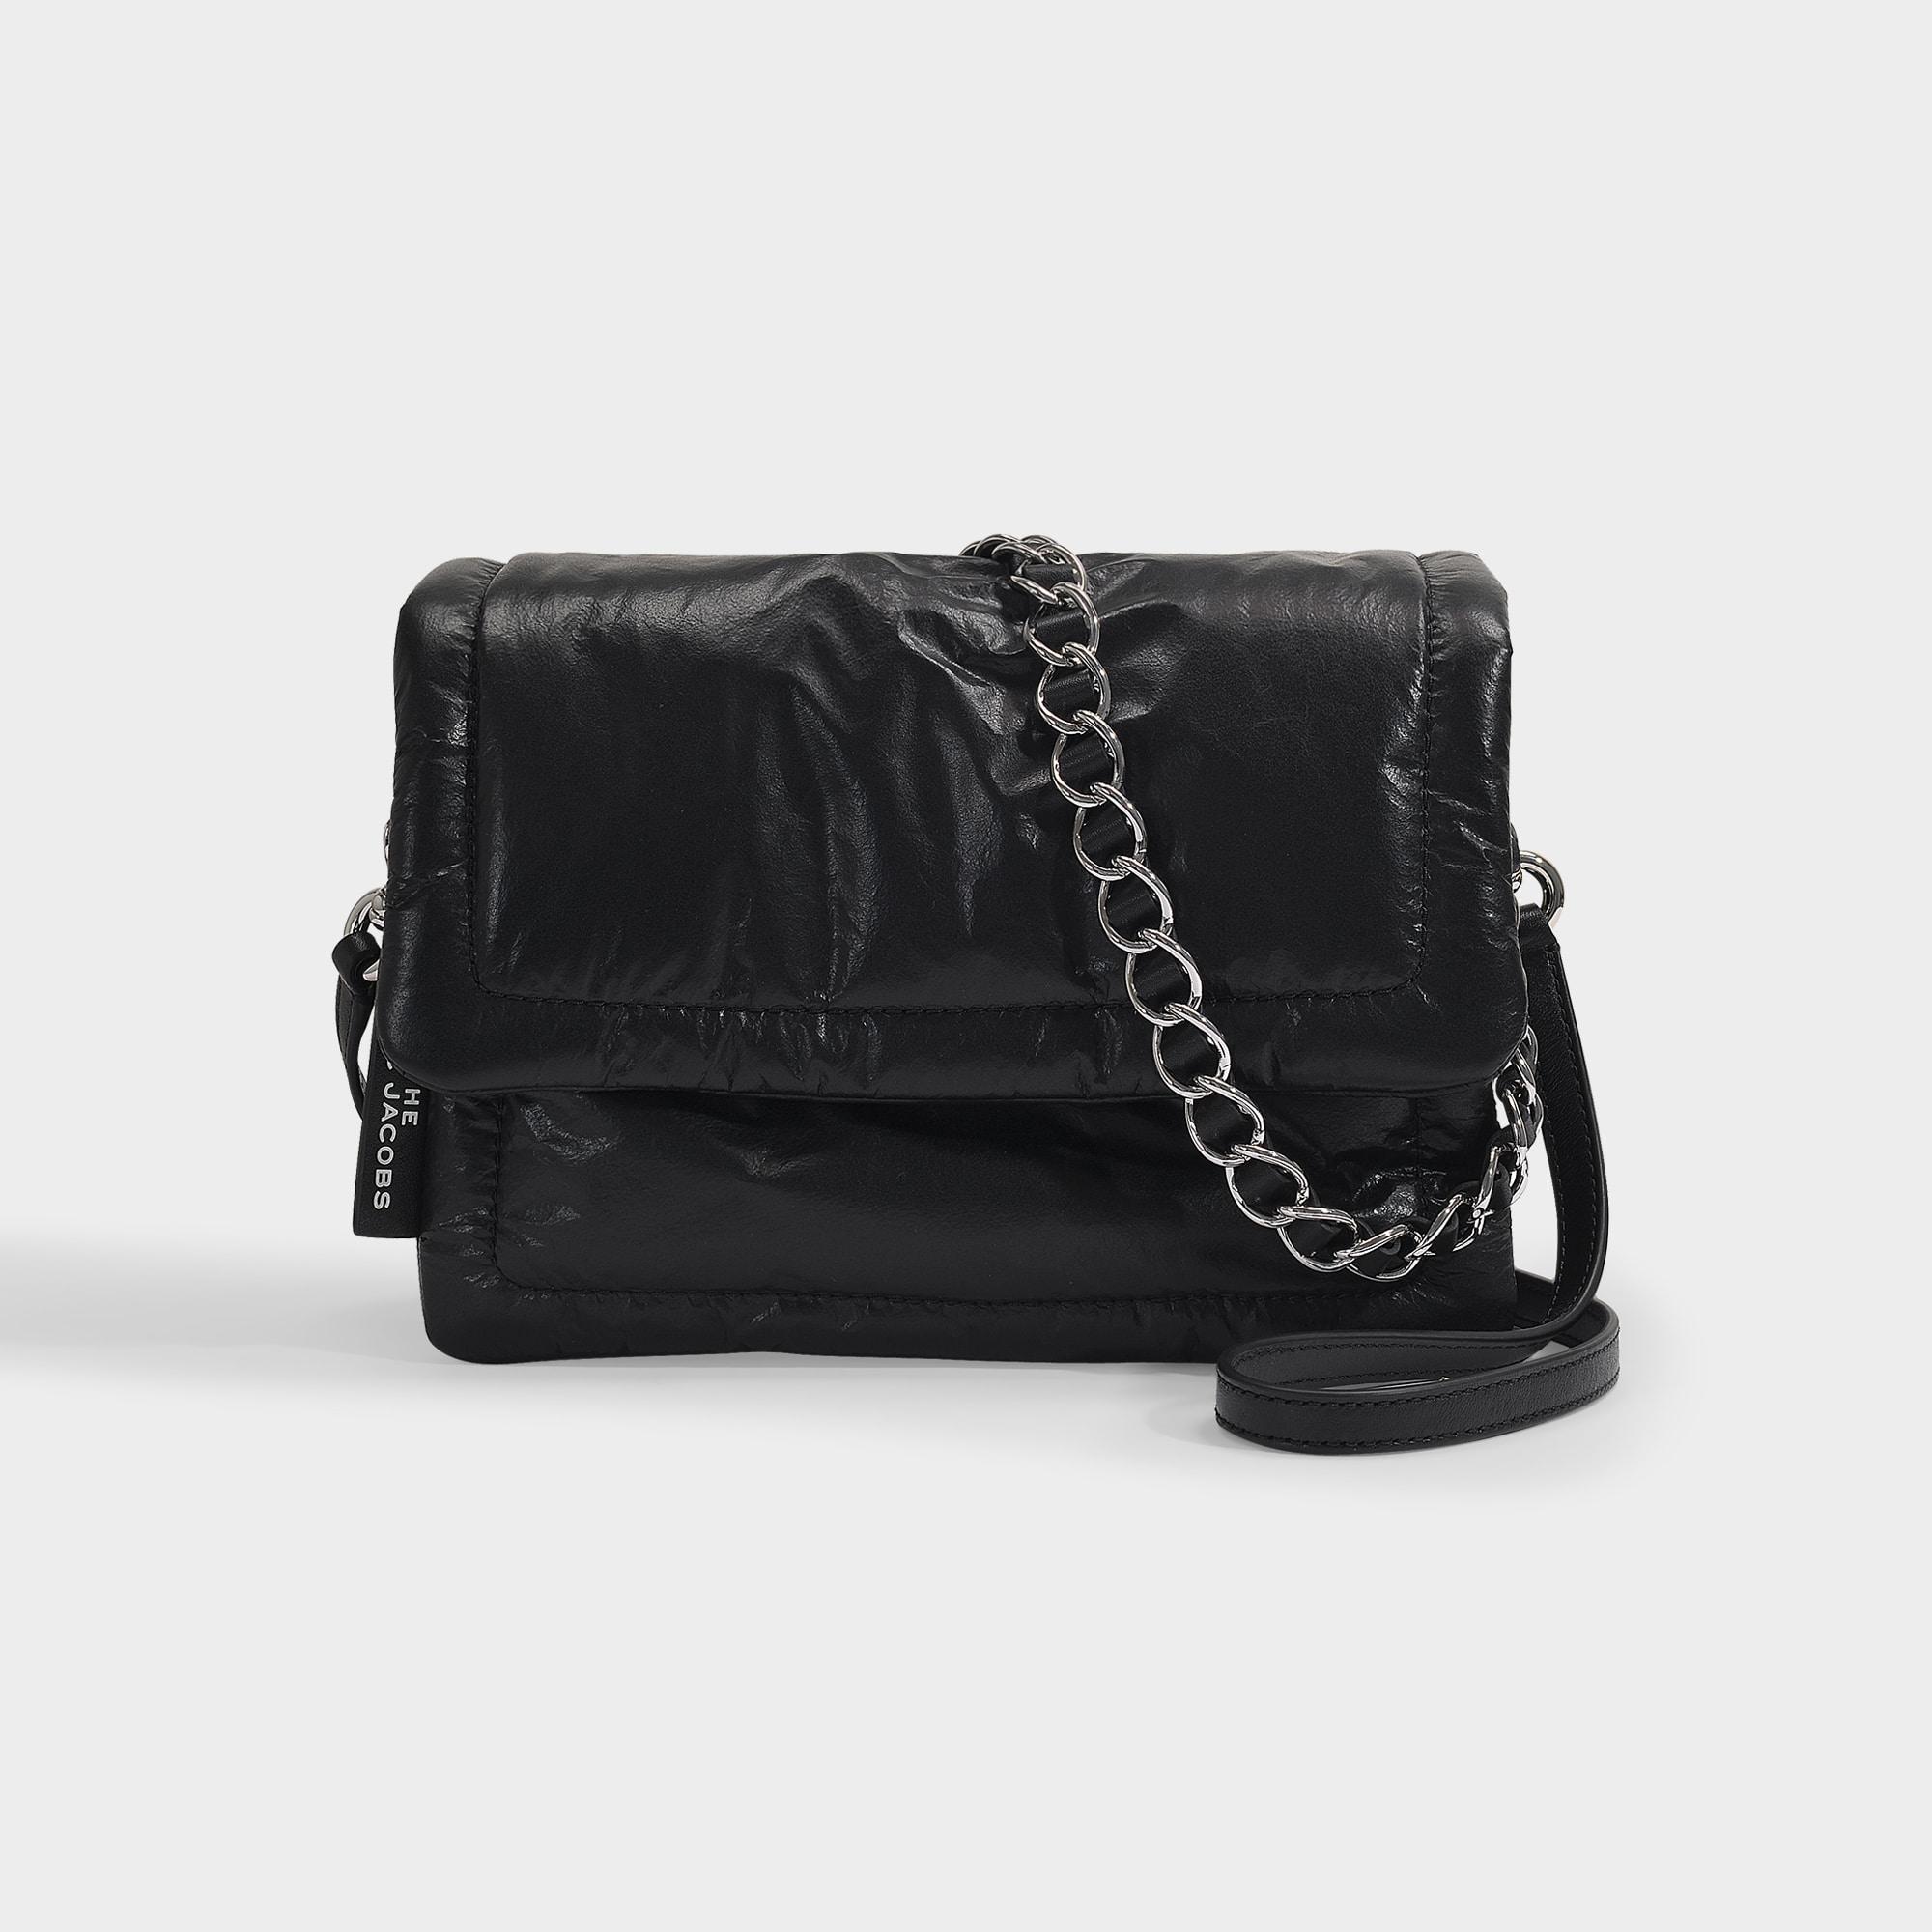 Marc Jacobs The Mini Pillow Bag In Black Lyst